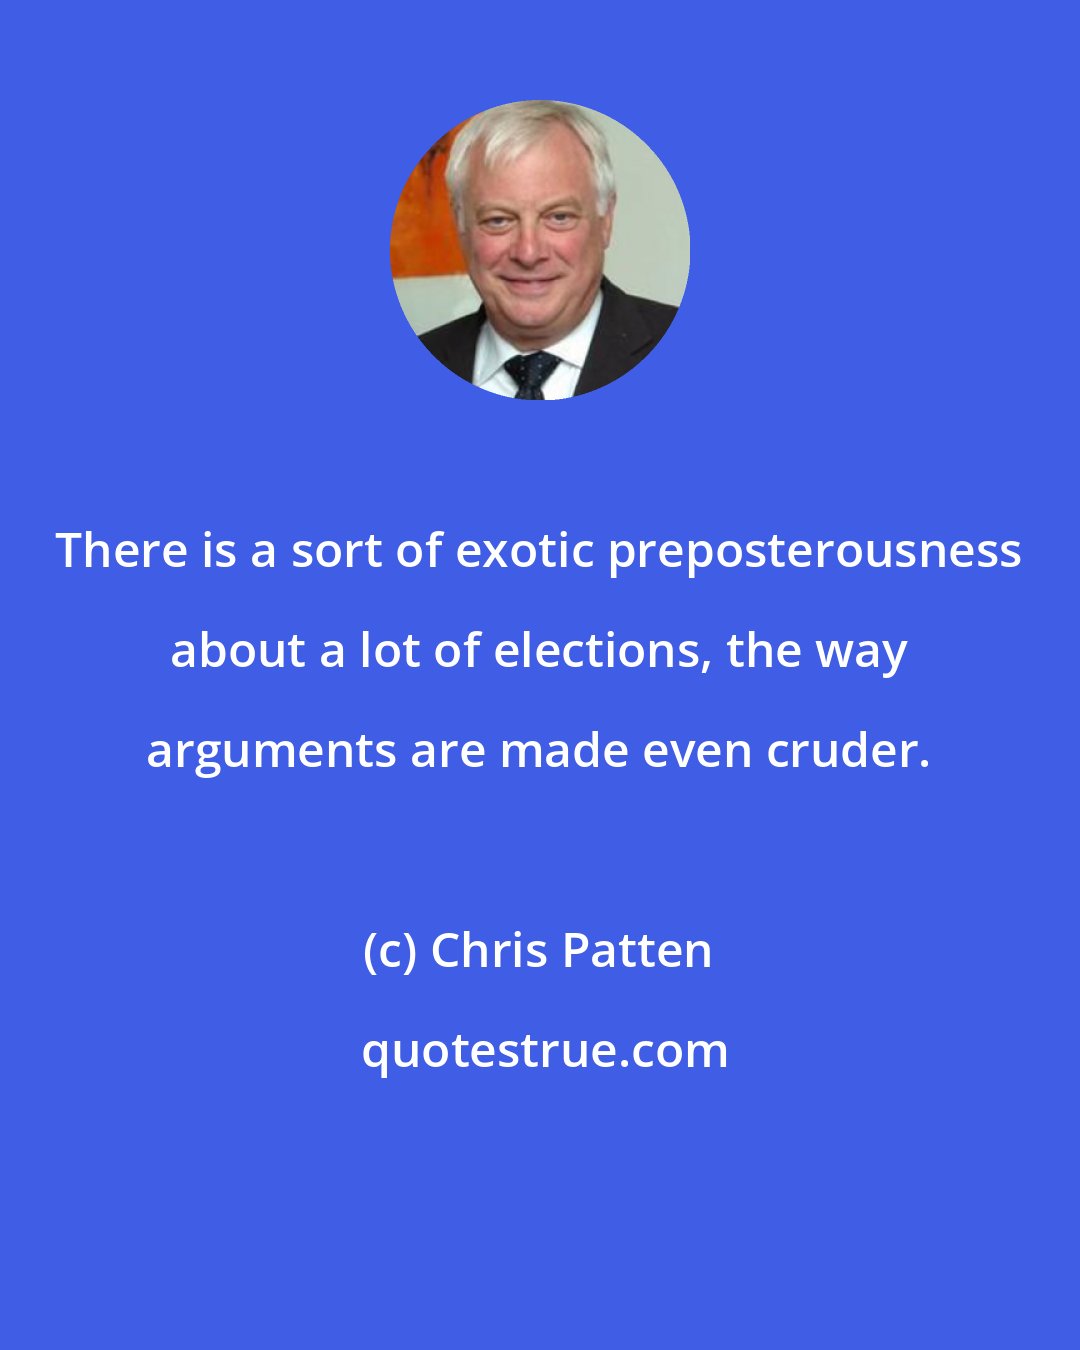 Chris Patten: There is a sort of exotic preposterousness about a lot of elections, the way arguments are made even cruder.